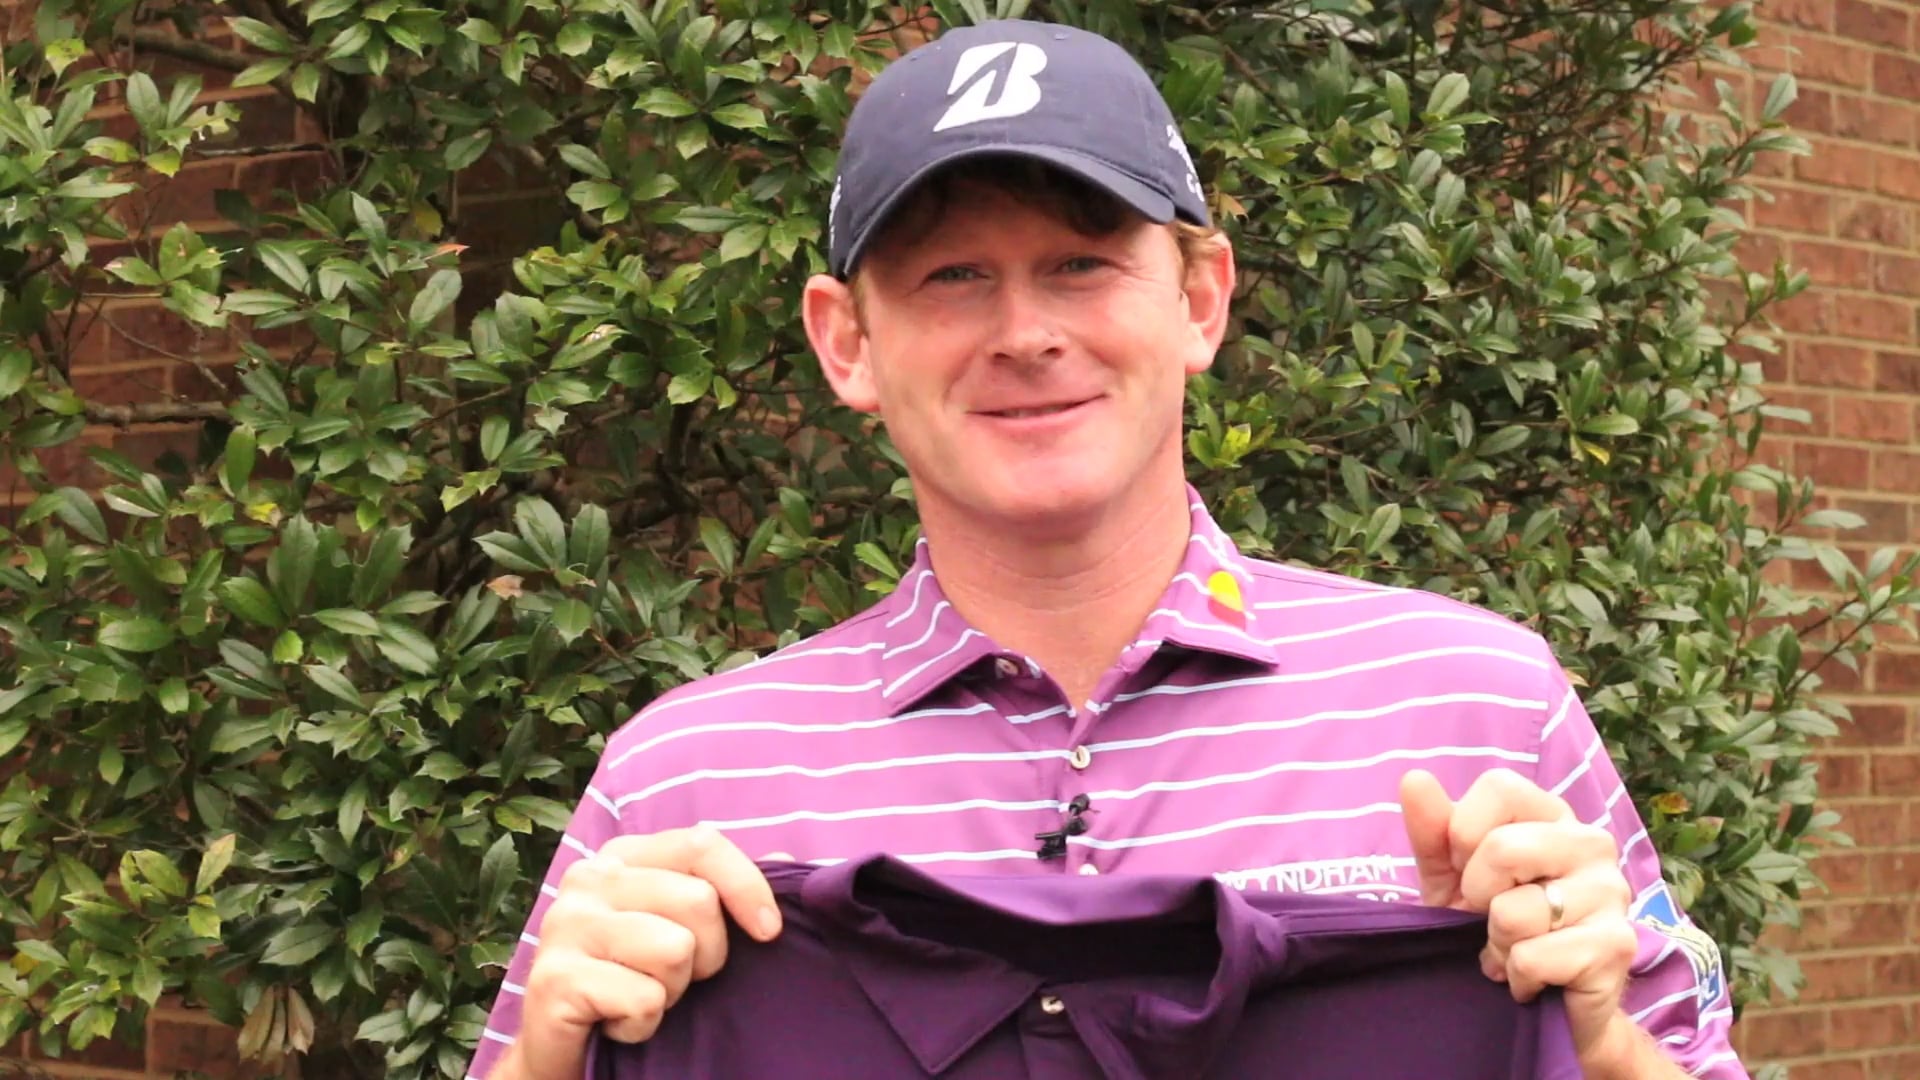 SNEDS TOUR Peter Millar, Official Clothing Provider on Vimeo